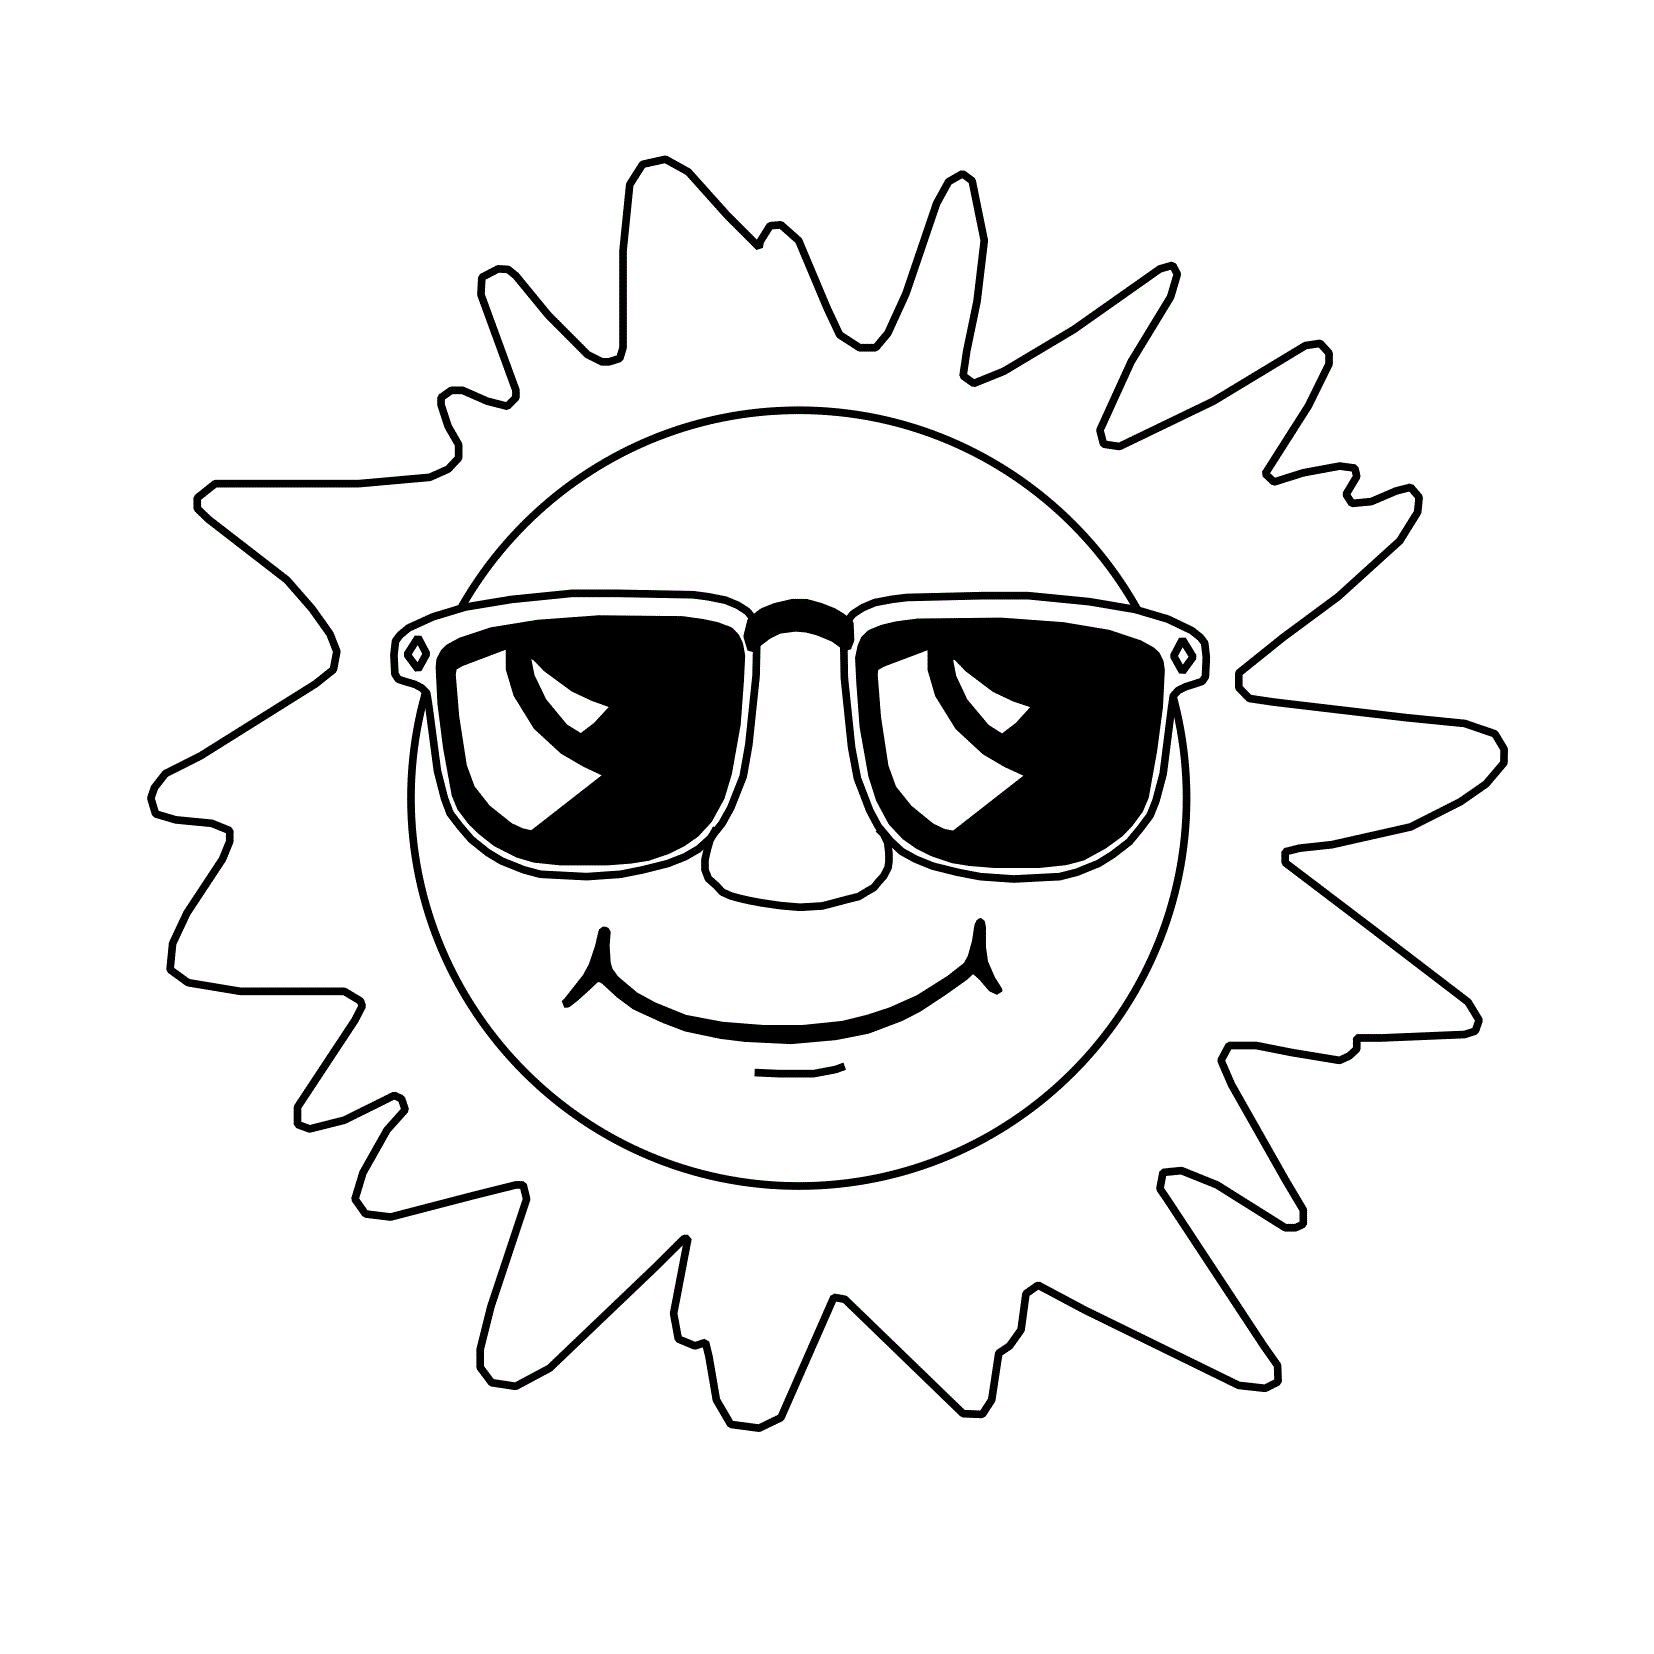 Sun Coloring Pages For Kids Coloring Pages